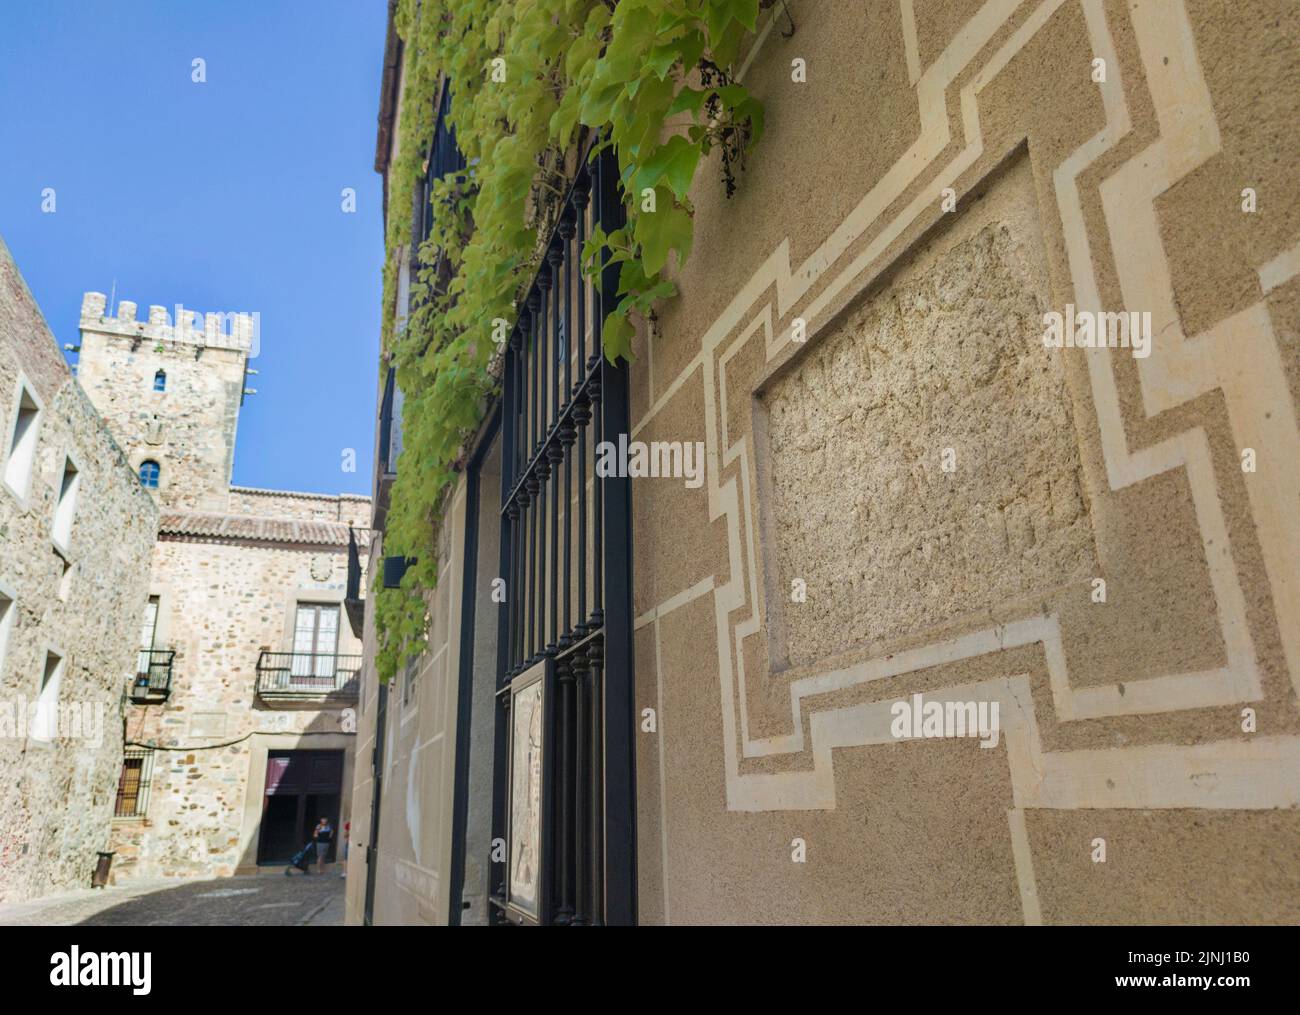 Roman tombstone built in historic quarter house. Roman remains still visible at Sande Palace, Caceres,  Extremadura, Spain Stock Photo